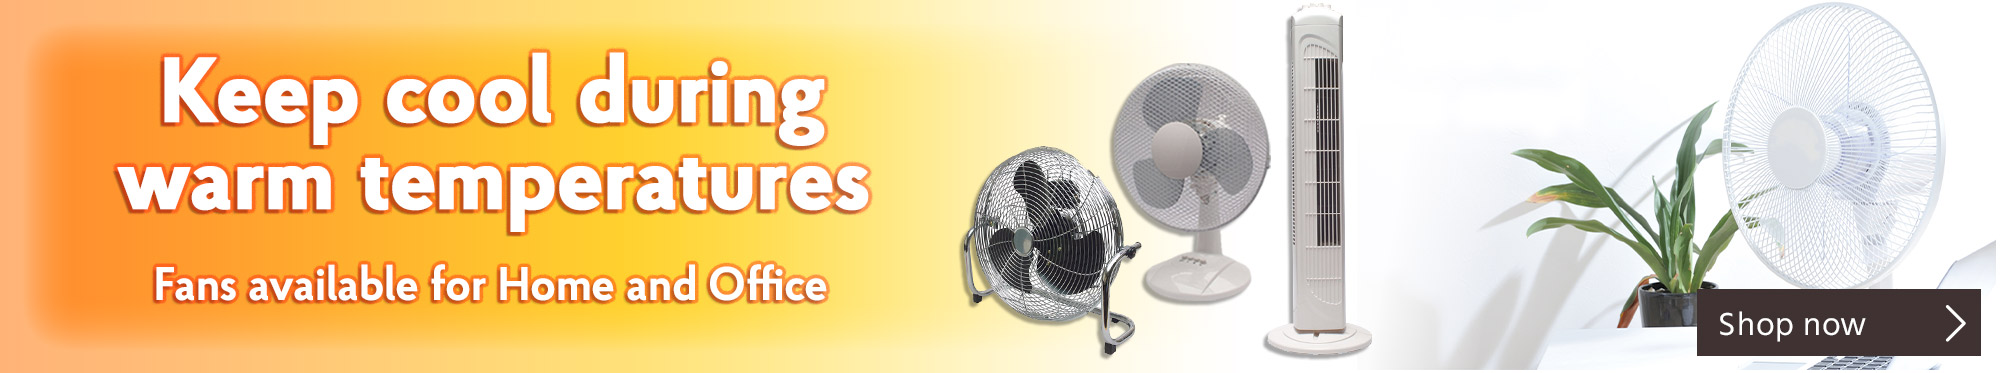 Fans Available for Home and Office